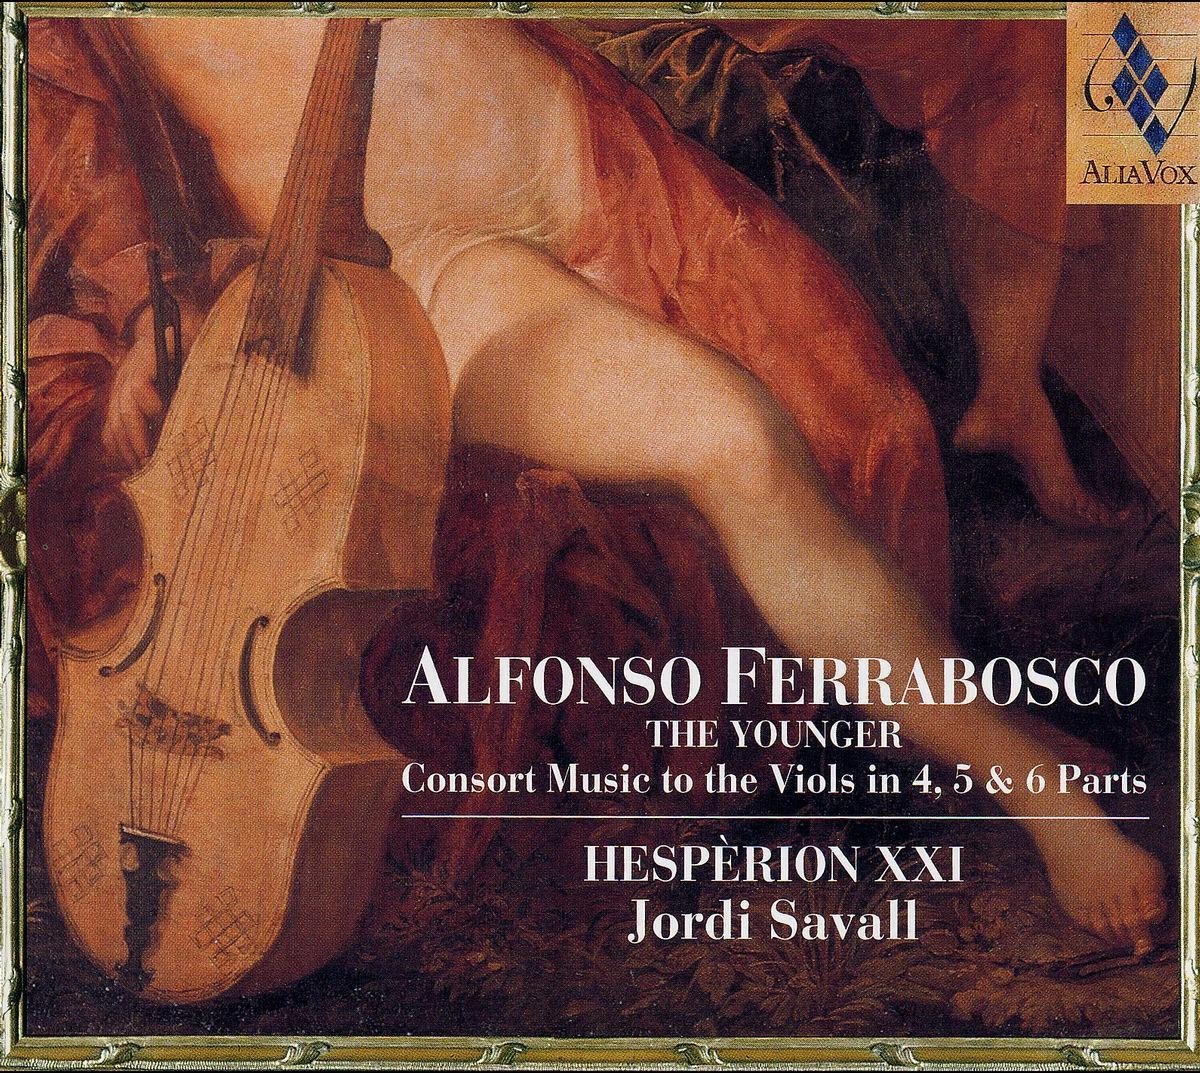 Jordi Savall & Hesperion XXI - The Younger / Consort Music Viols (CD) - Jordi Savall & Hesperion XXI